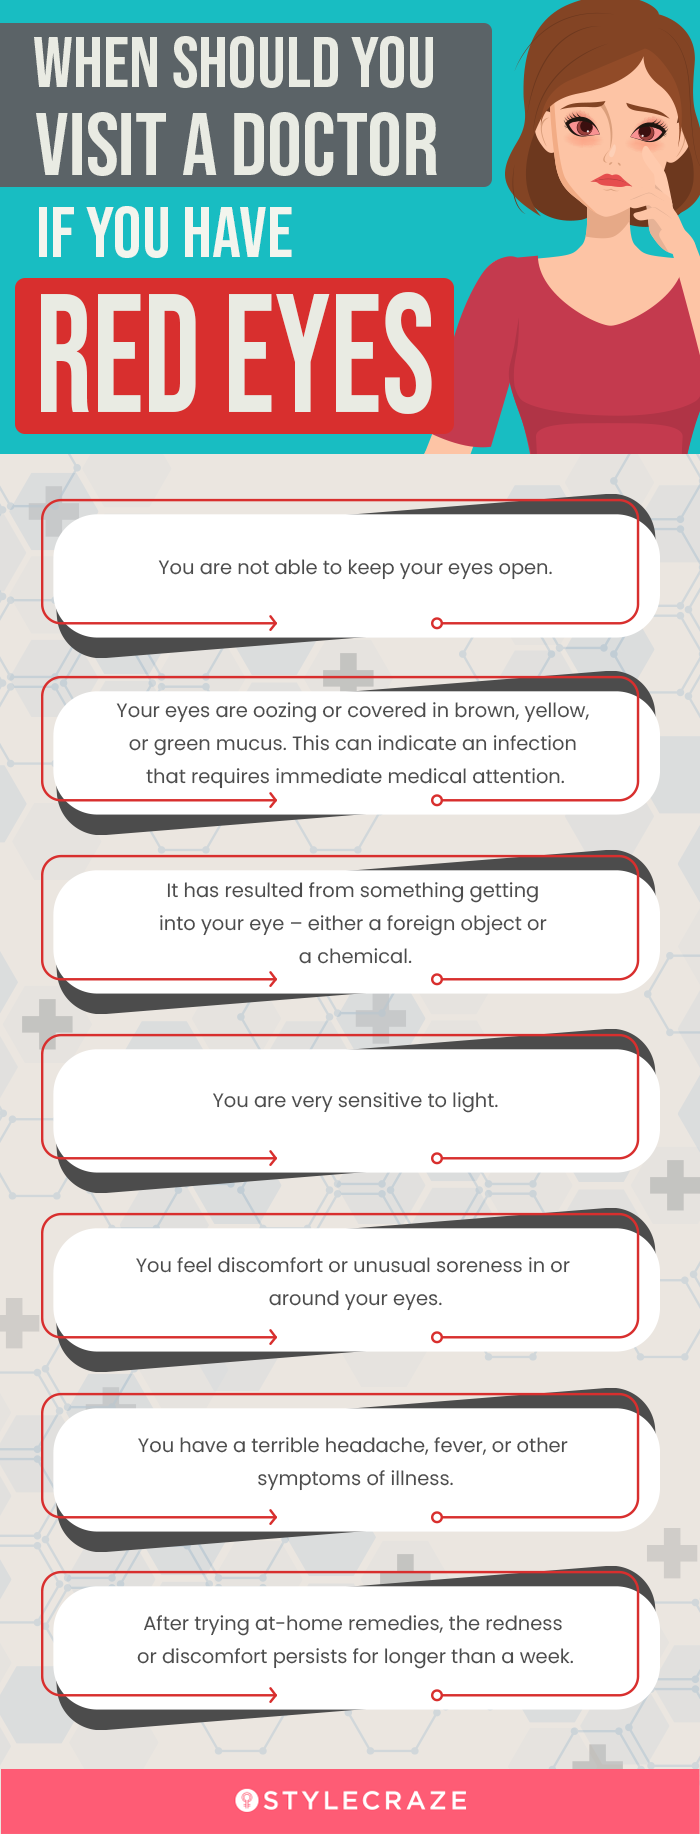 when should you visit a doctor if you have red eyes(infographic)